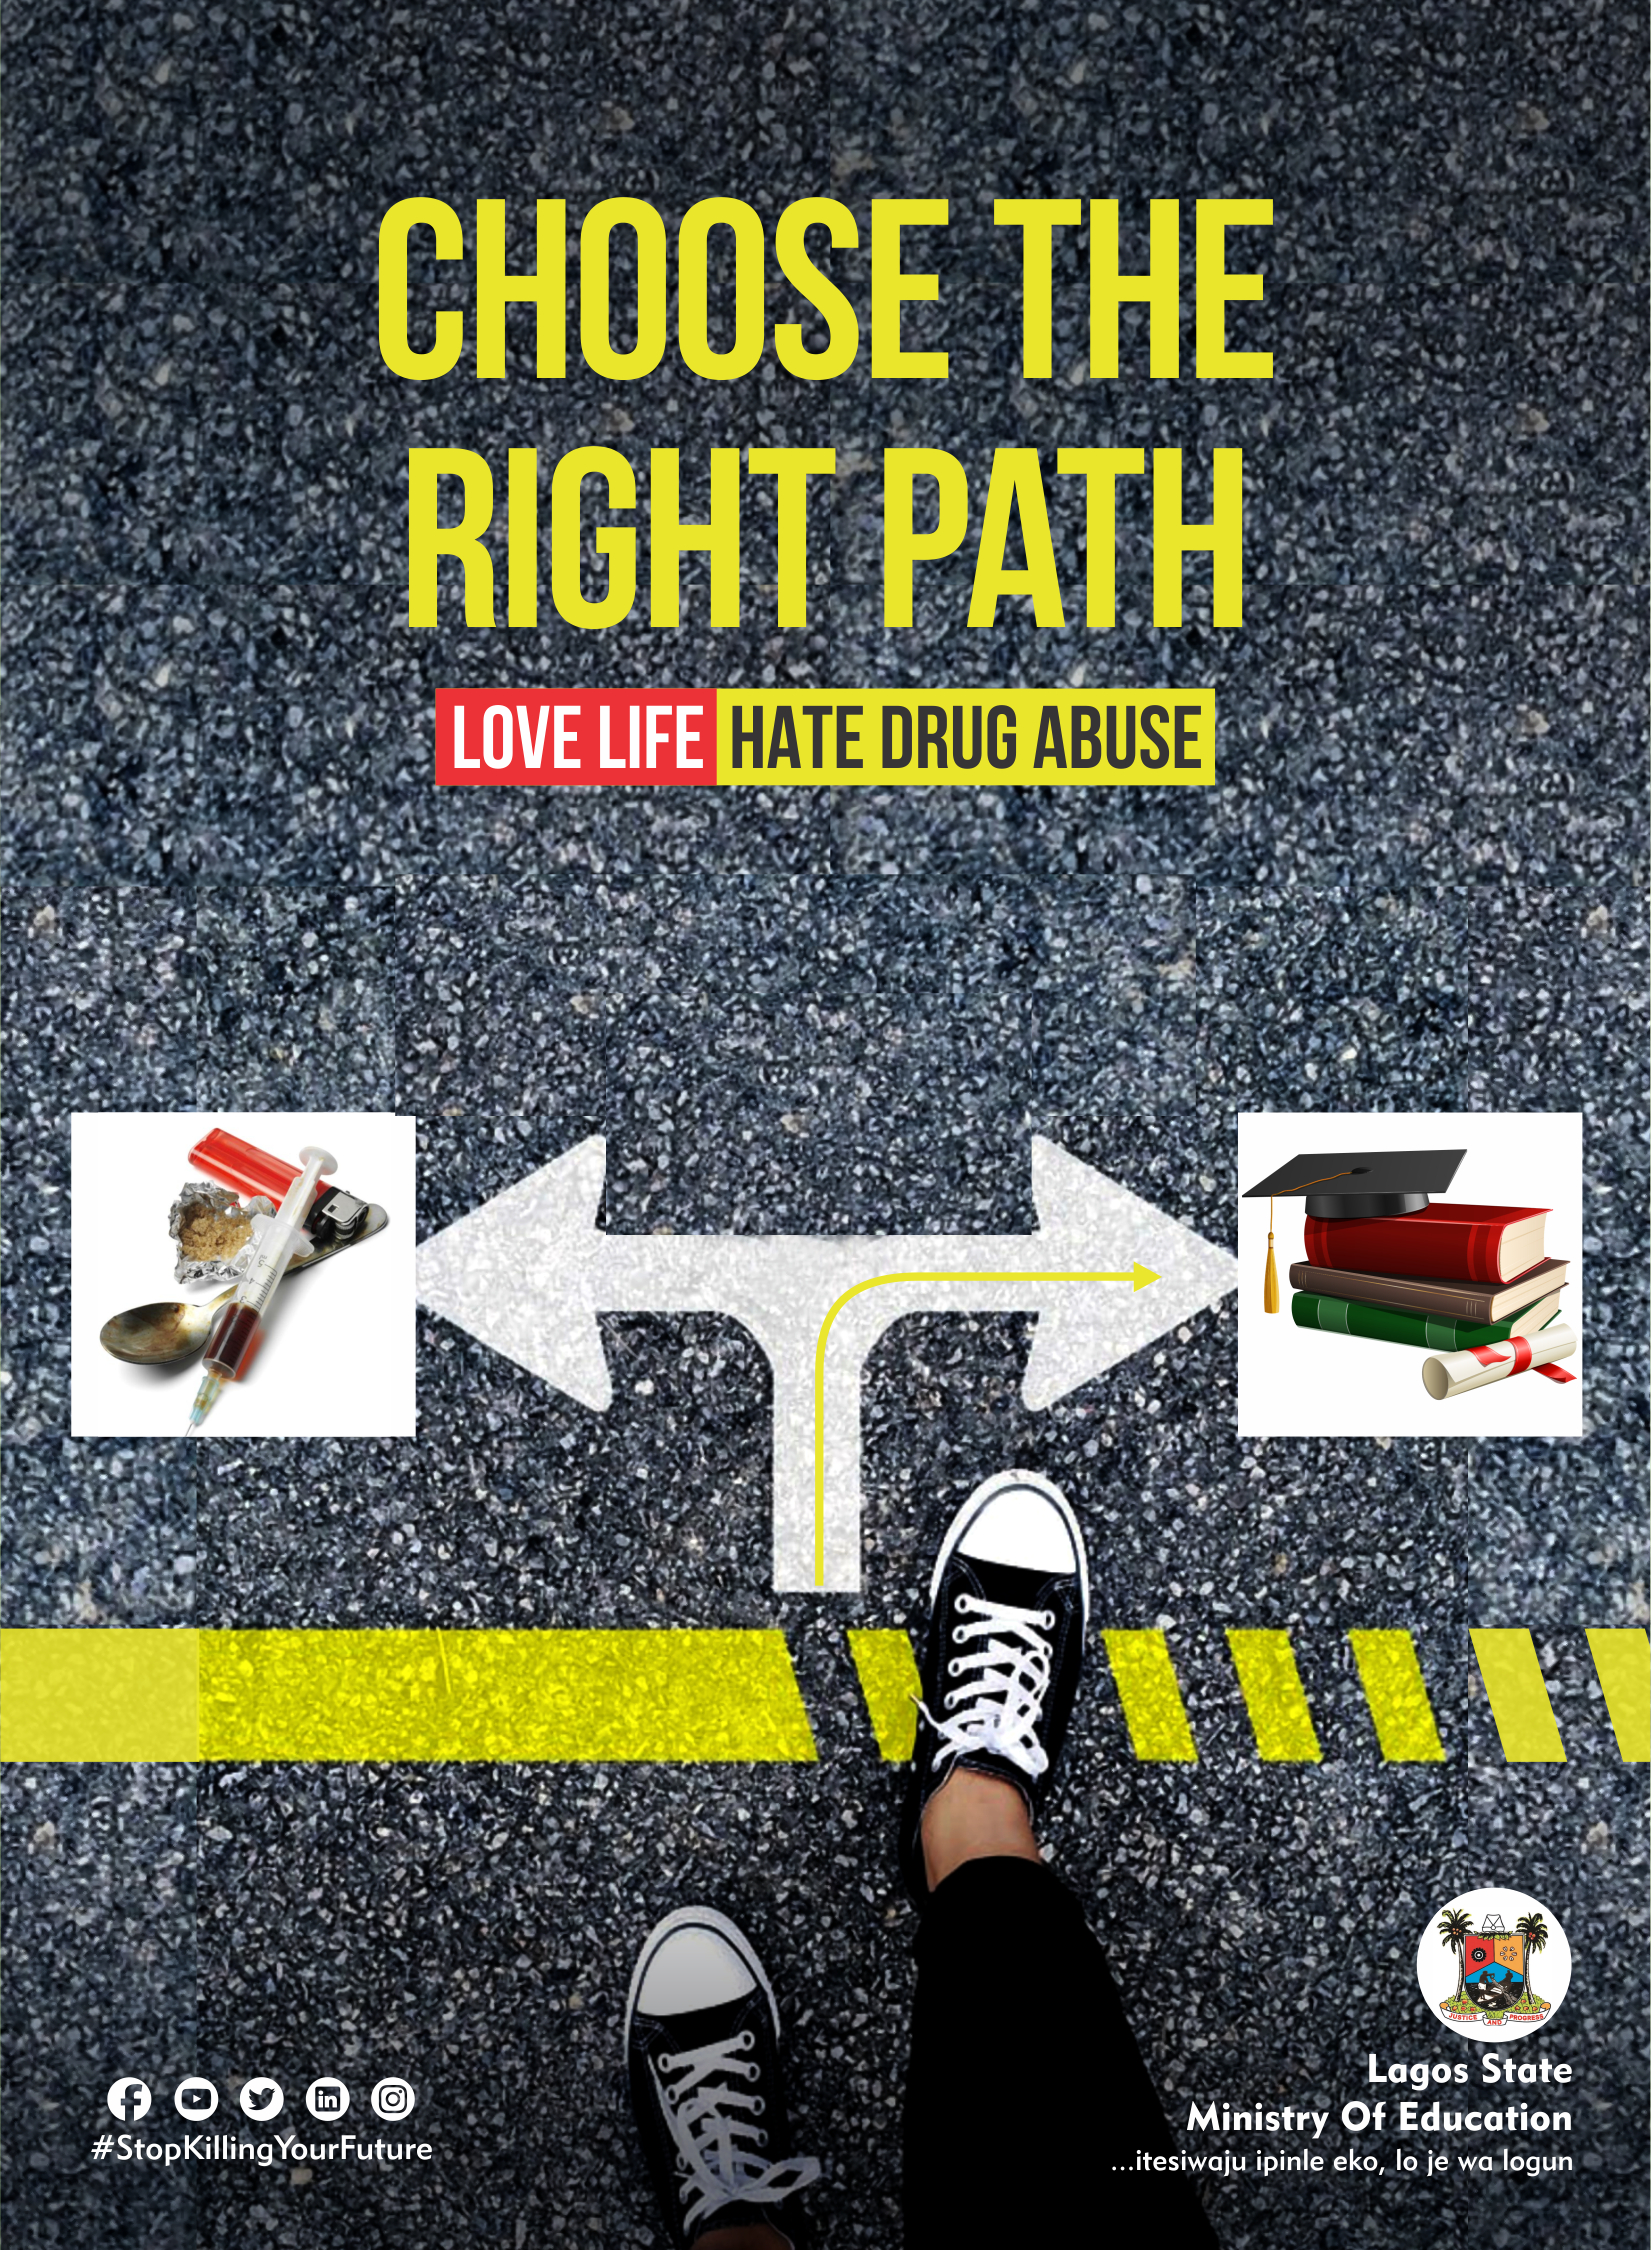 Choose the right path campaign